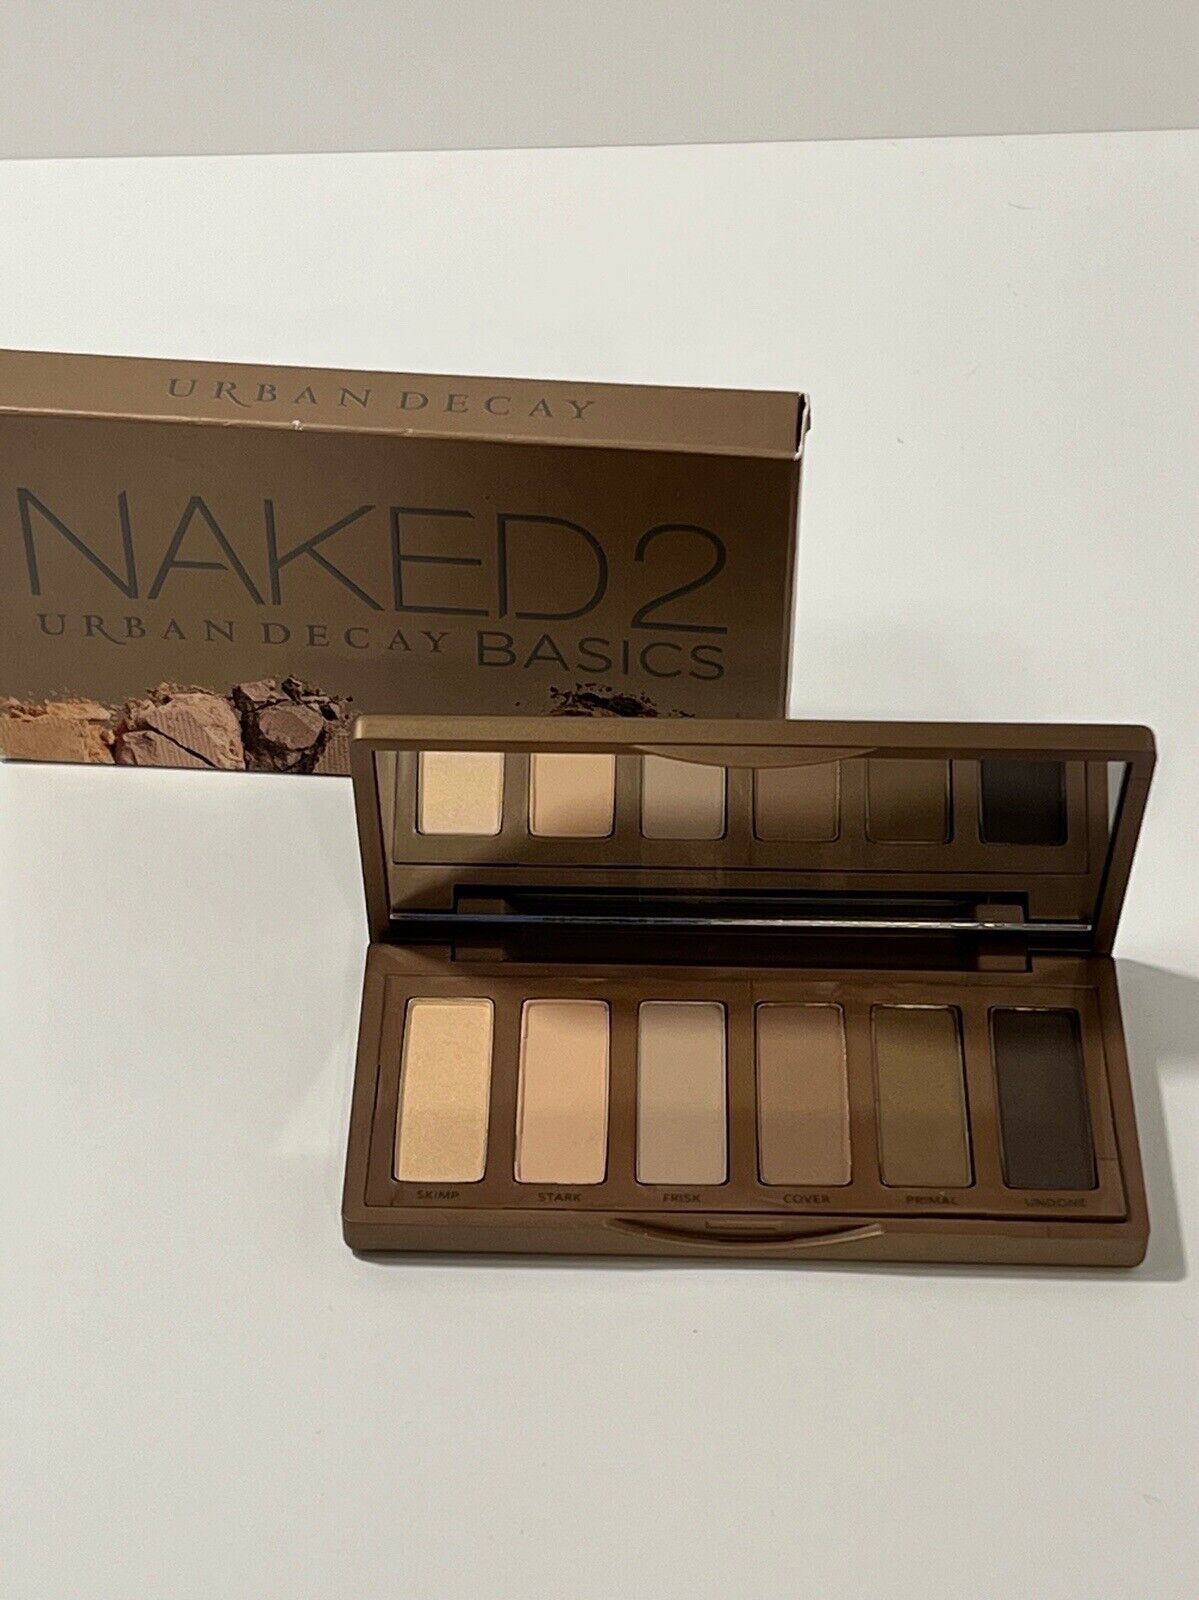 Primary image for Urban Decay Naked2 Basics 6 Shade Eyeshadow Palette AUTHENTIC